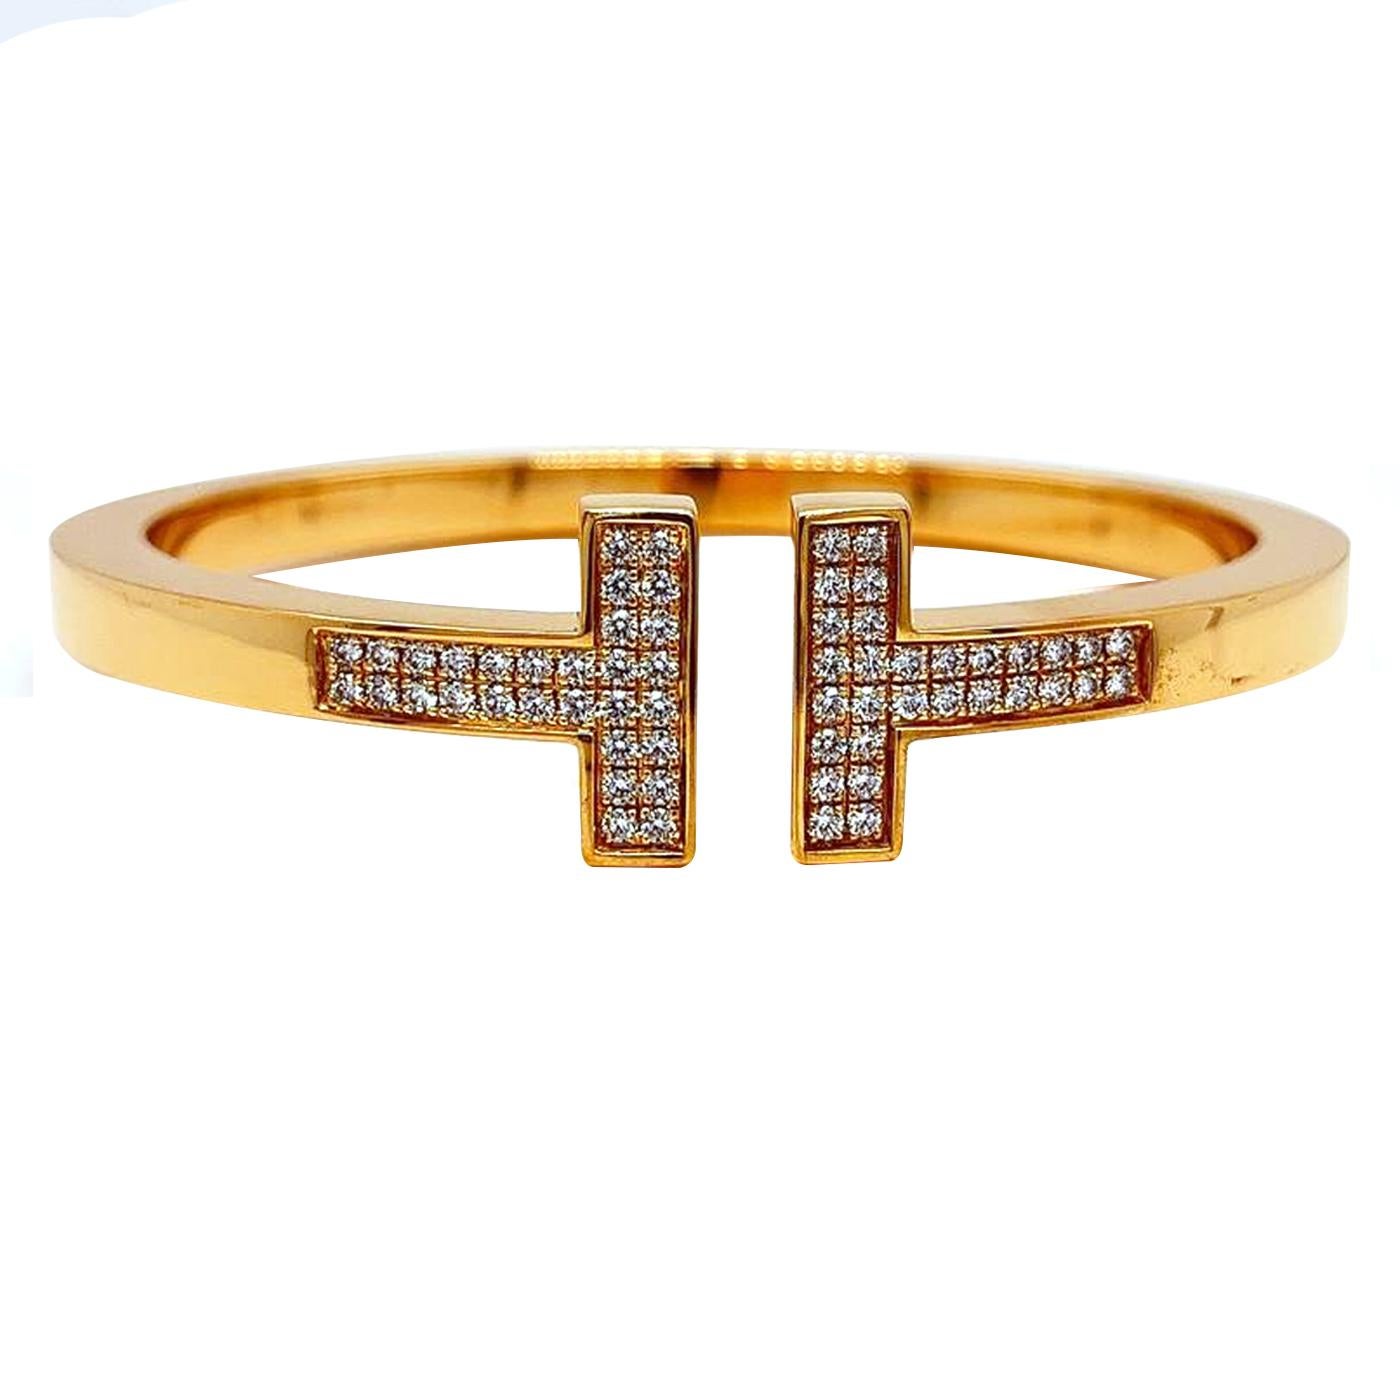 Tiffany & Co. T 0.75ct Pave Diamonds 18k Yellow Gold Square Bracelet In Excellent Condition For Sale In Aventura, FL